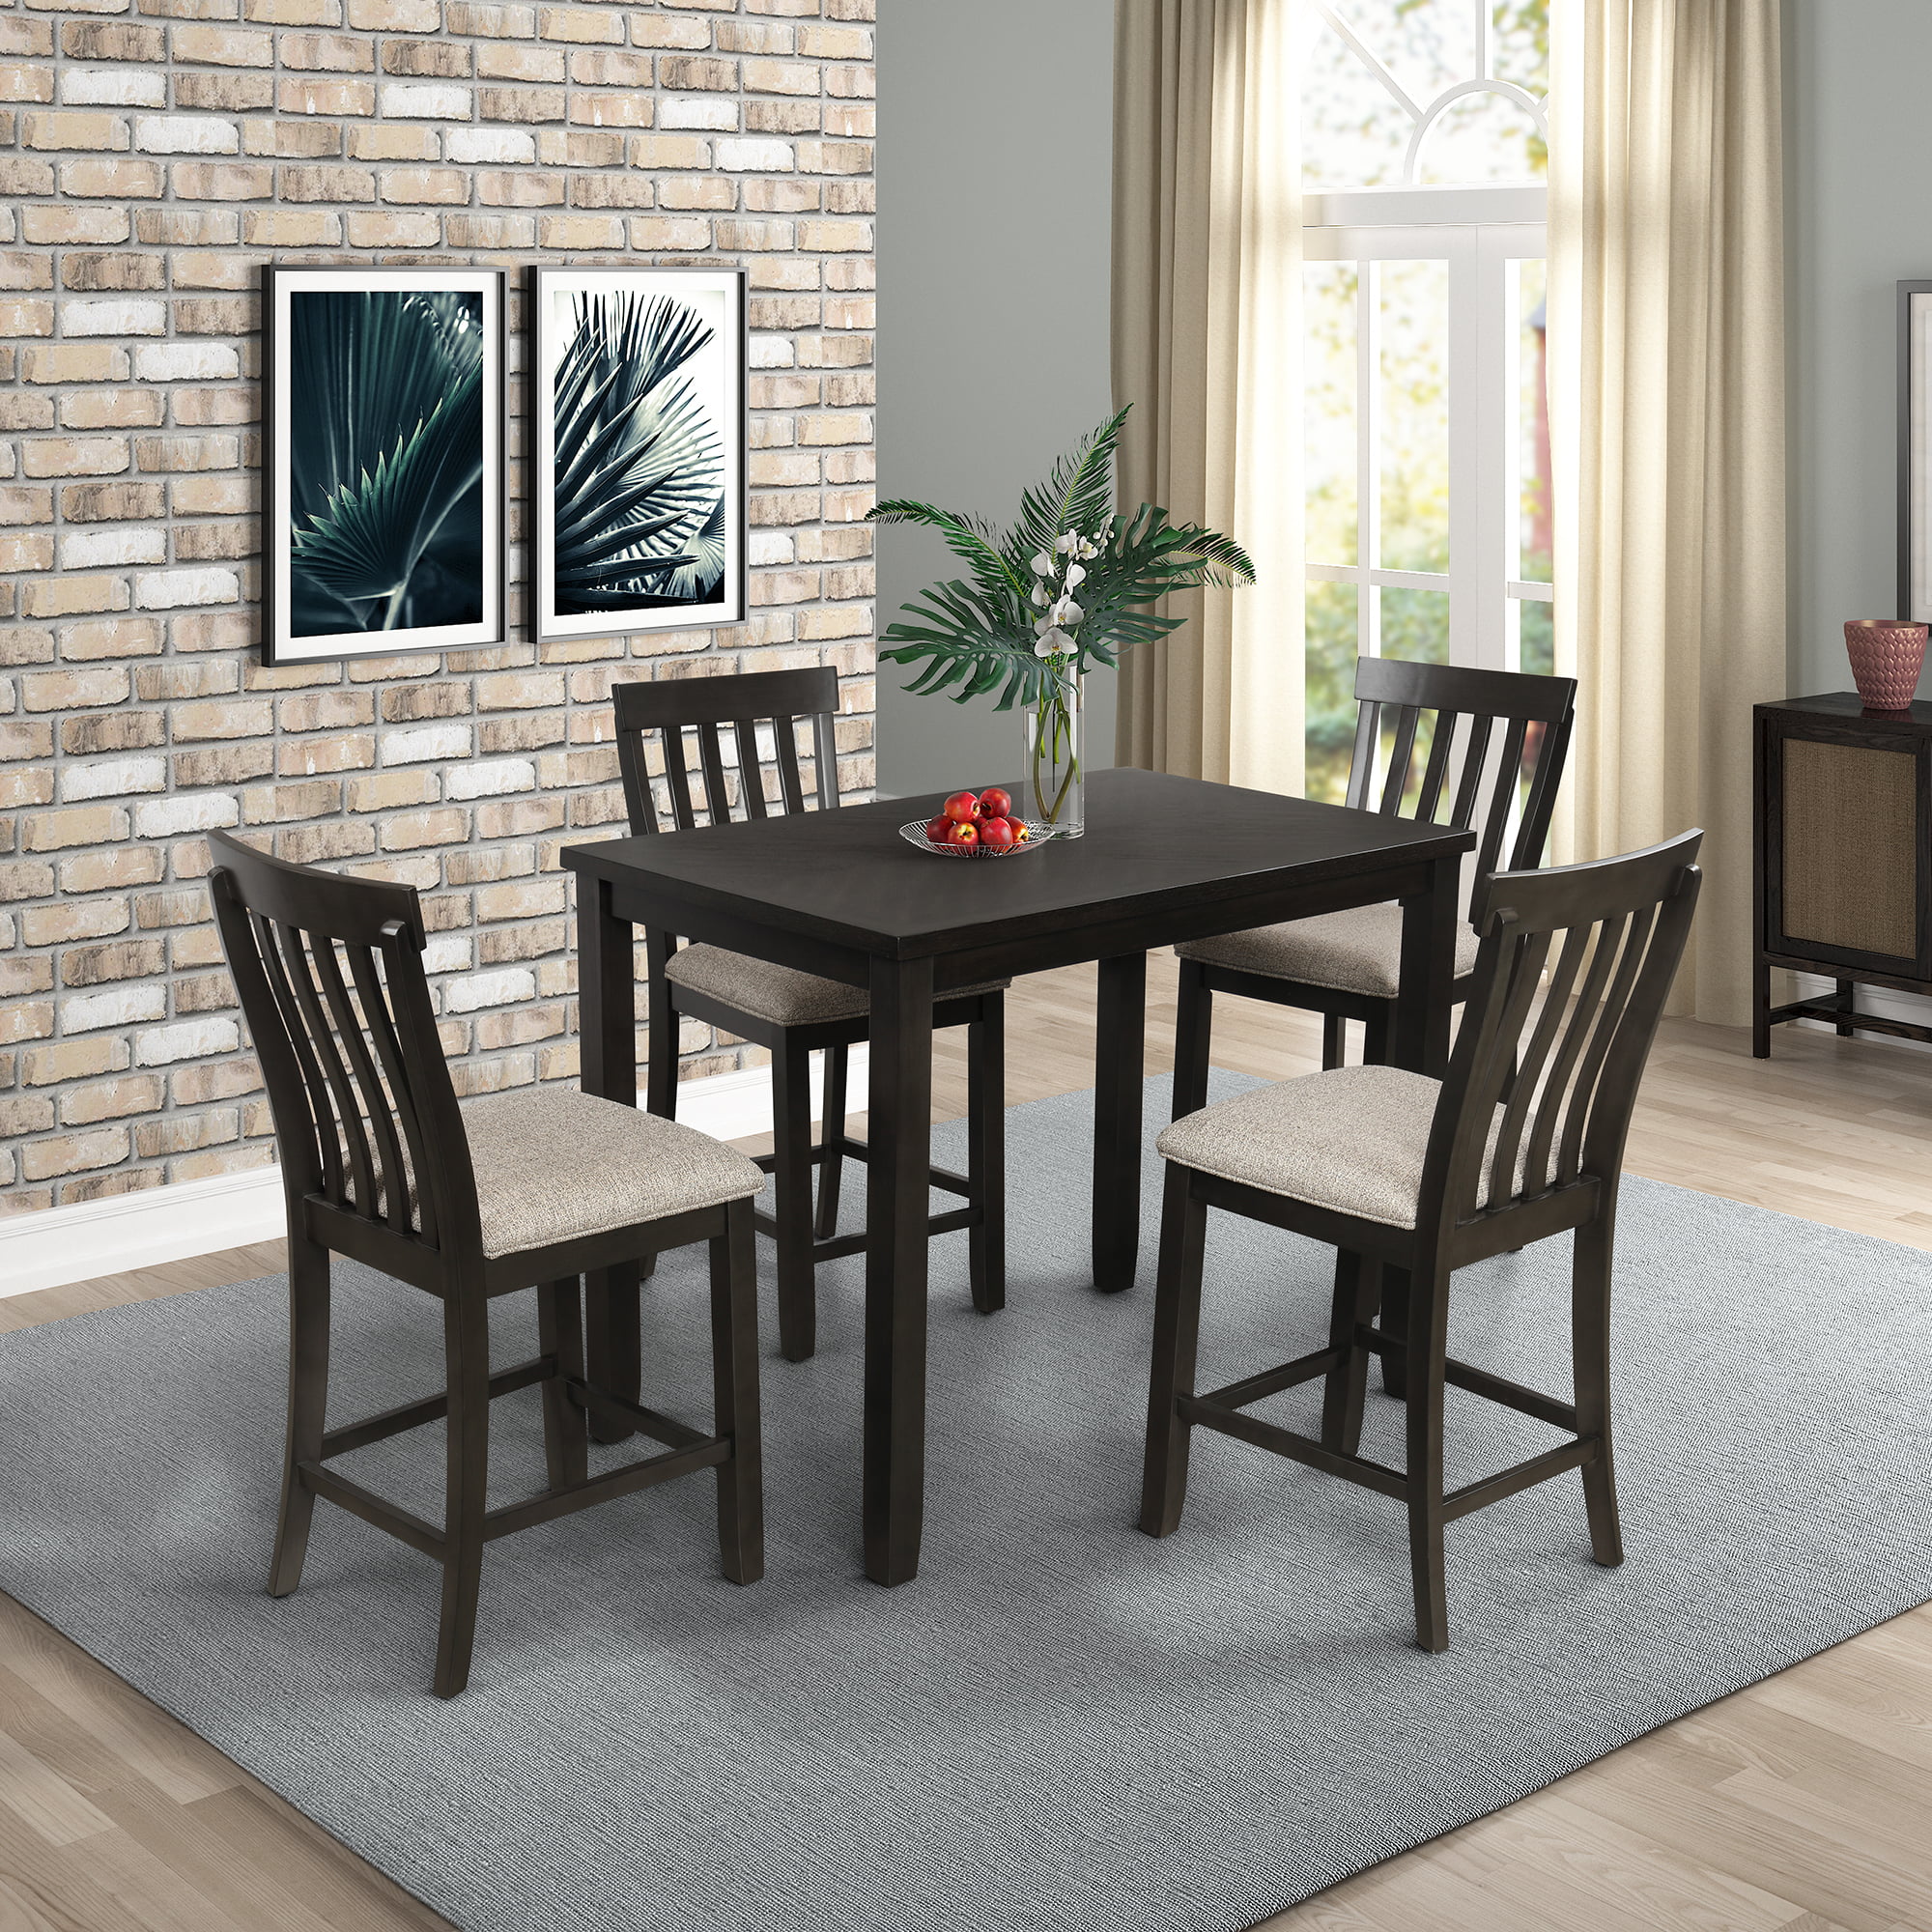 Costway 5 Piece Dining Set Table And 4